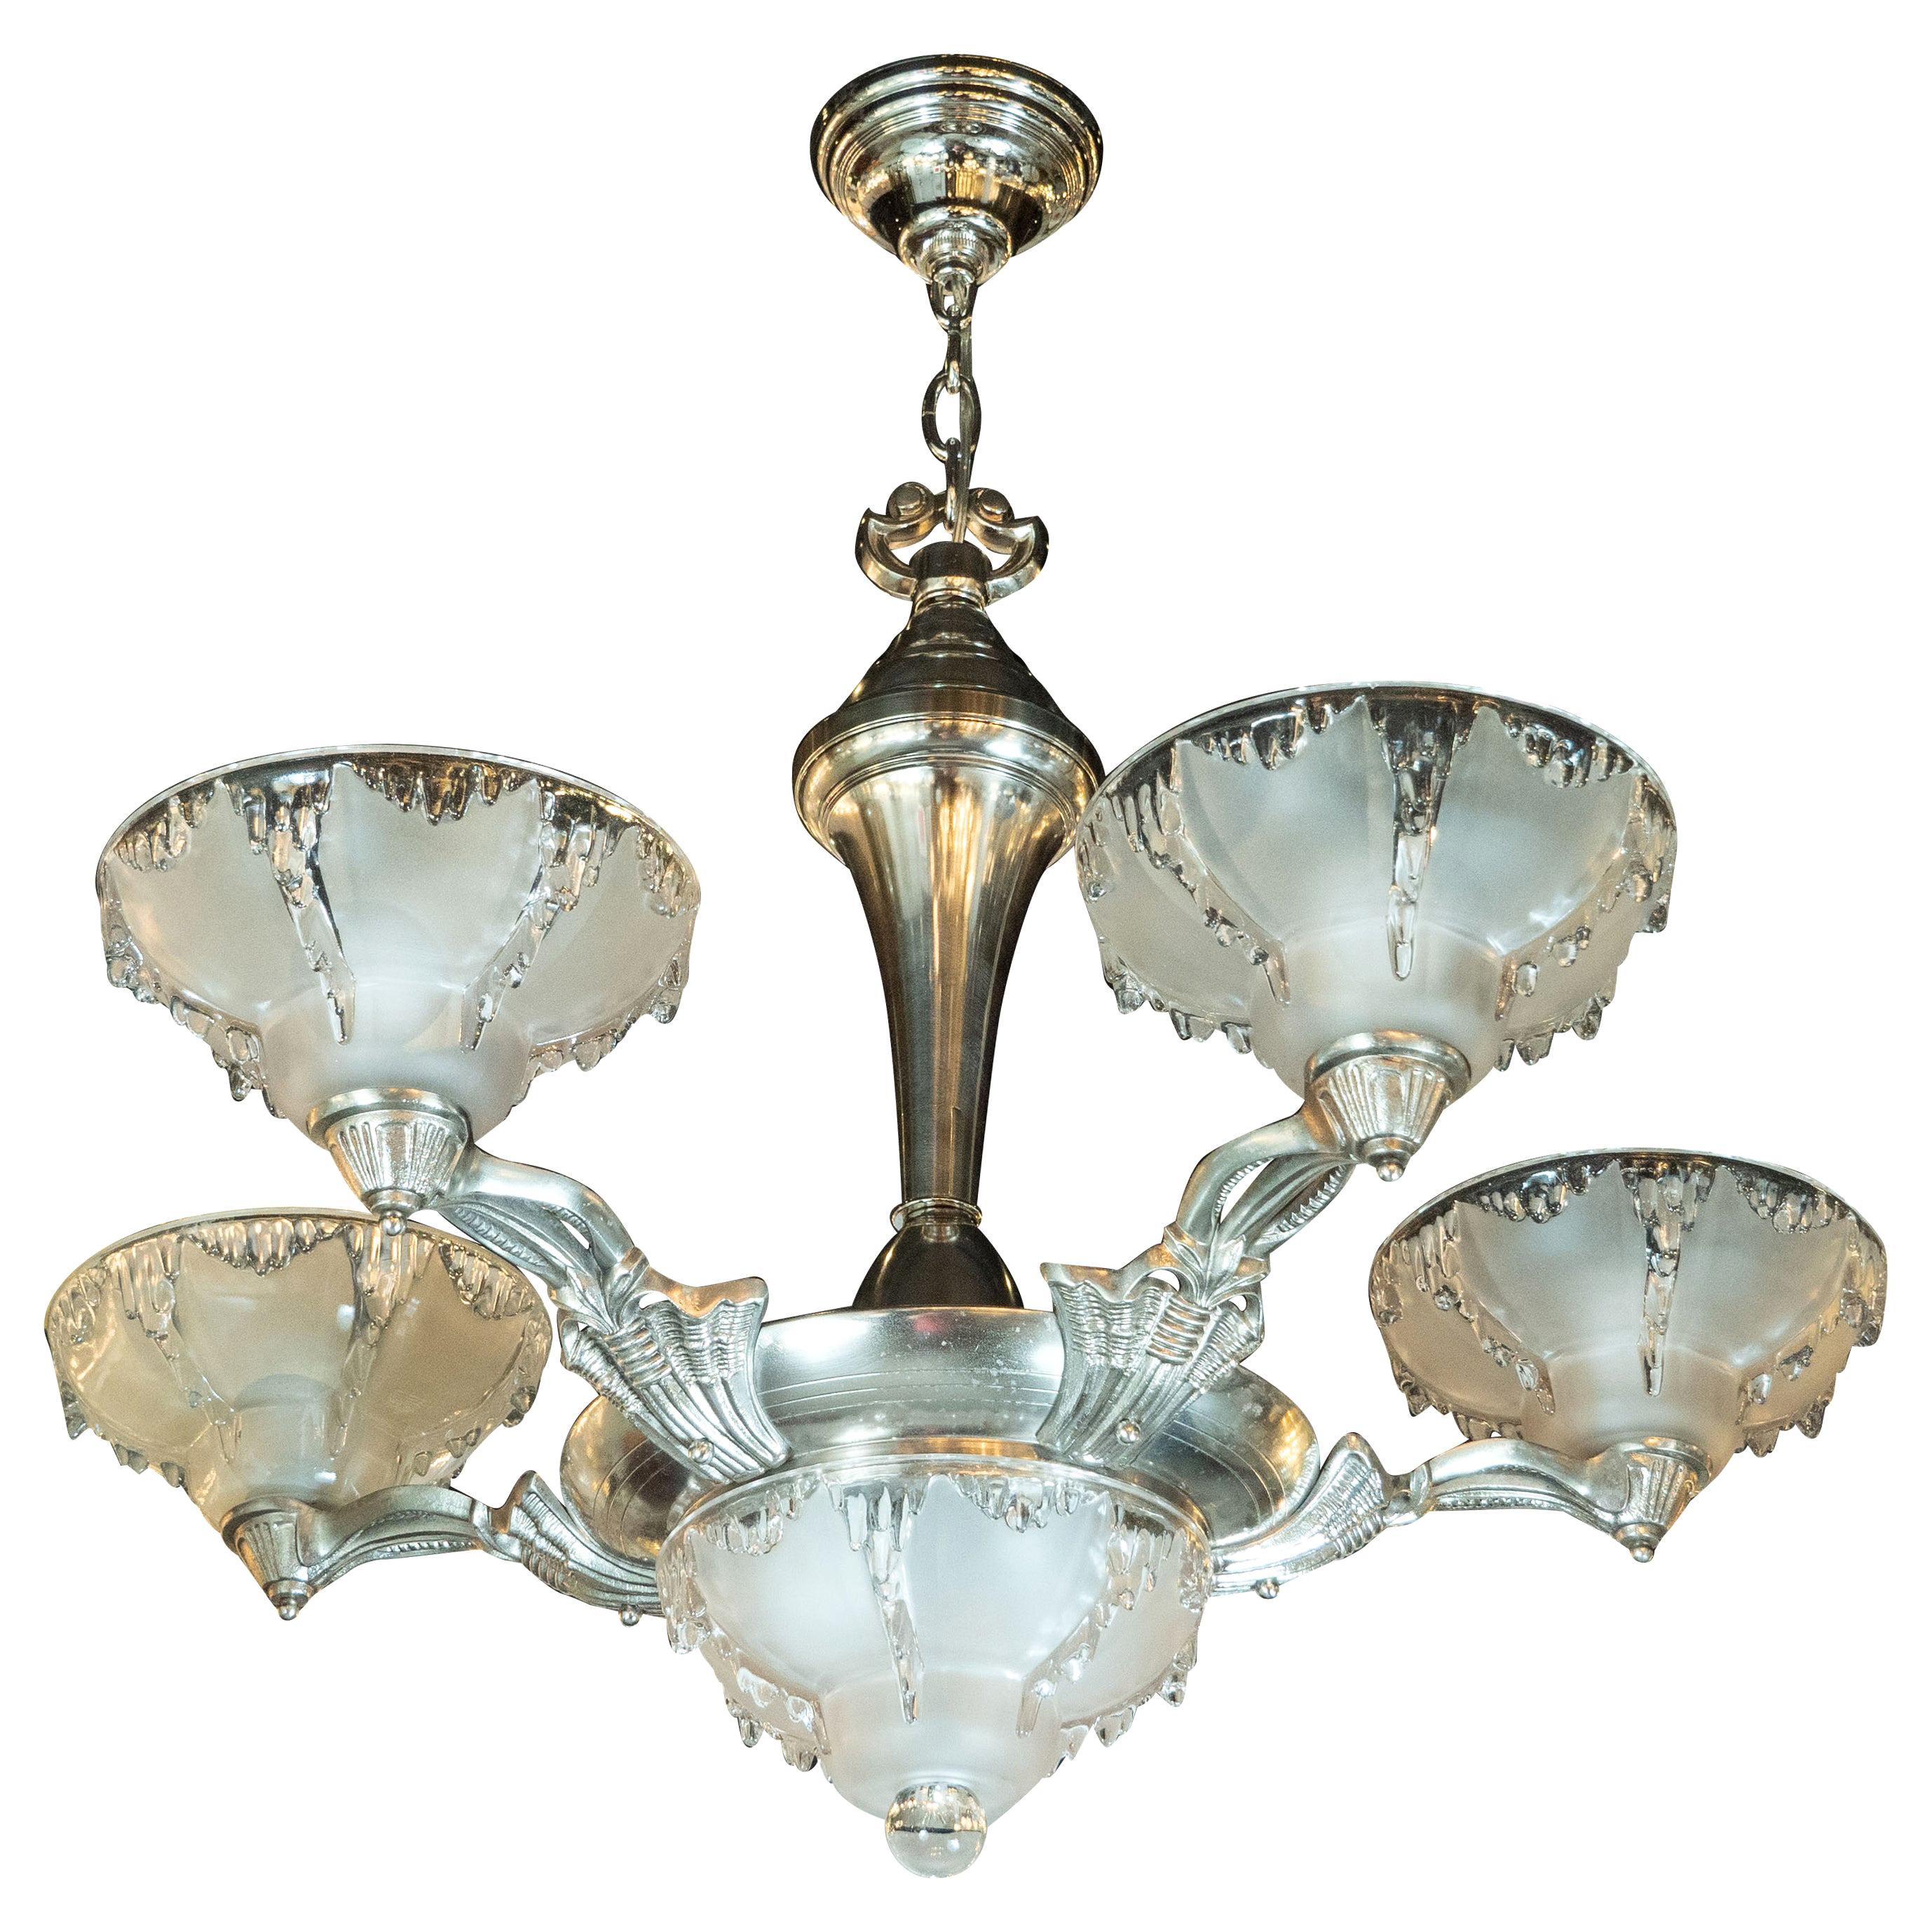 Art Deco Frosted Glass Chandelier with Silvered Bronze Fittings, Ezan & Petitot